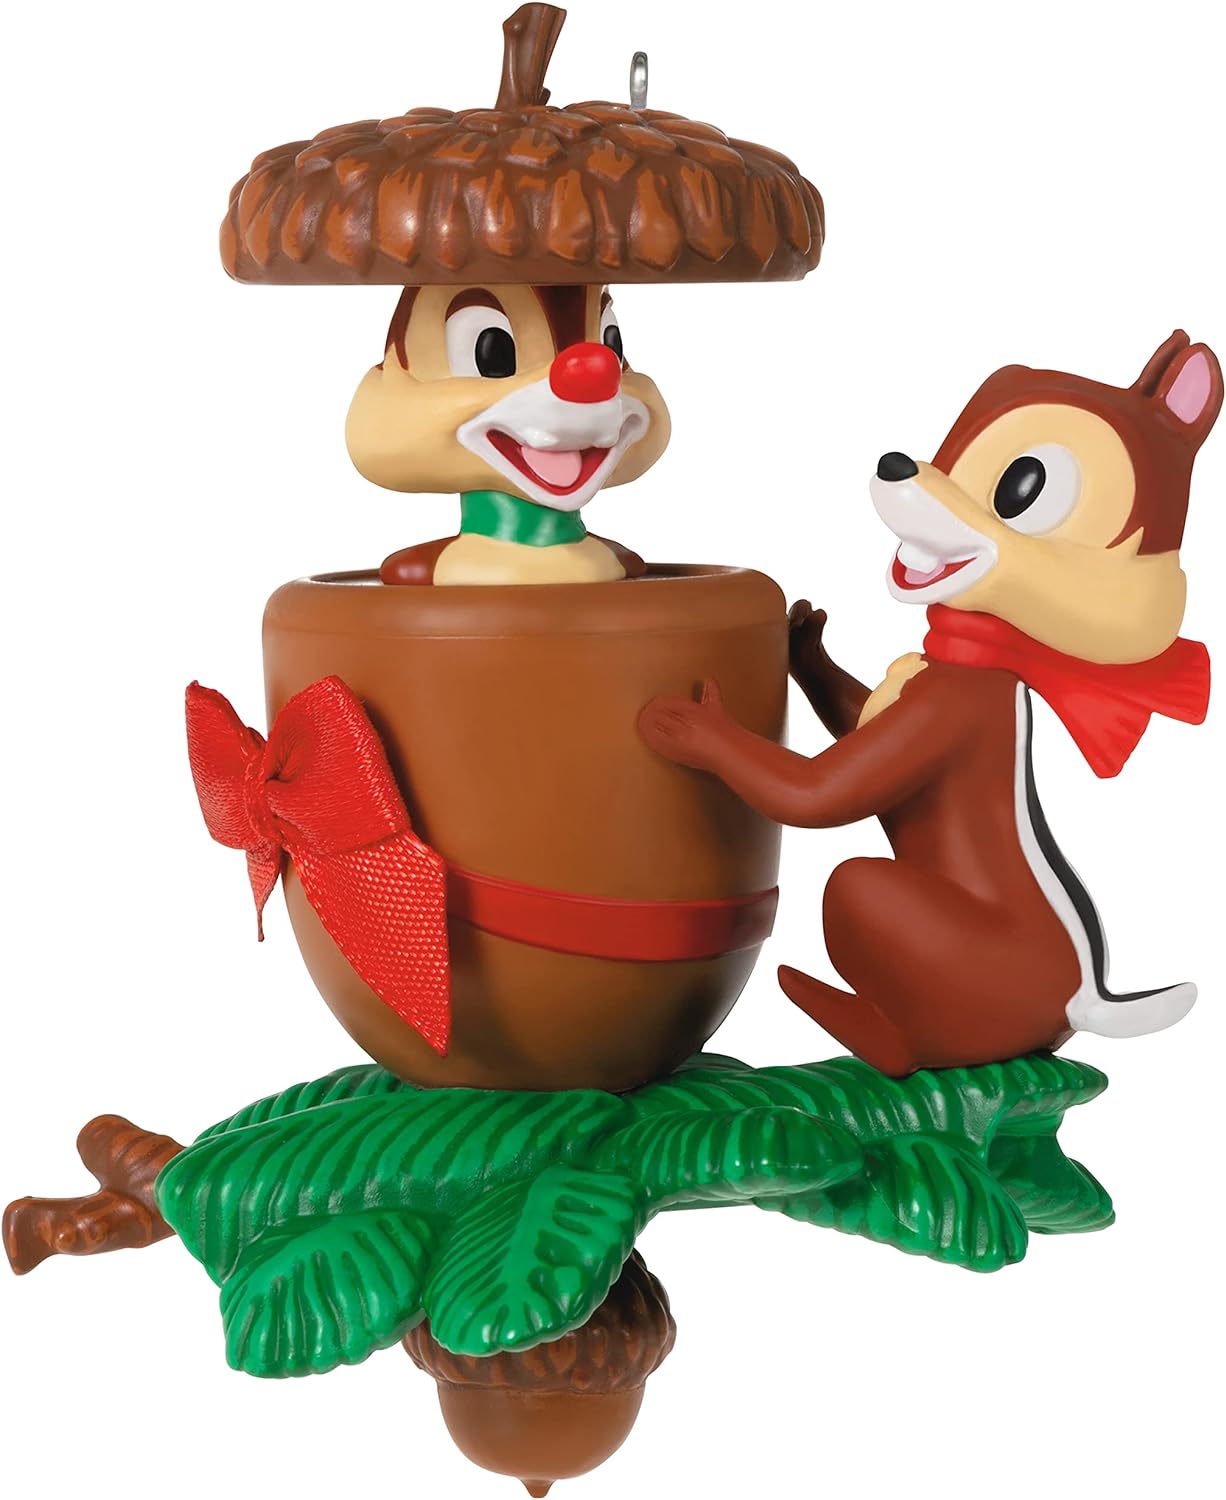 Disney Chip and Dale Christmas Ornament